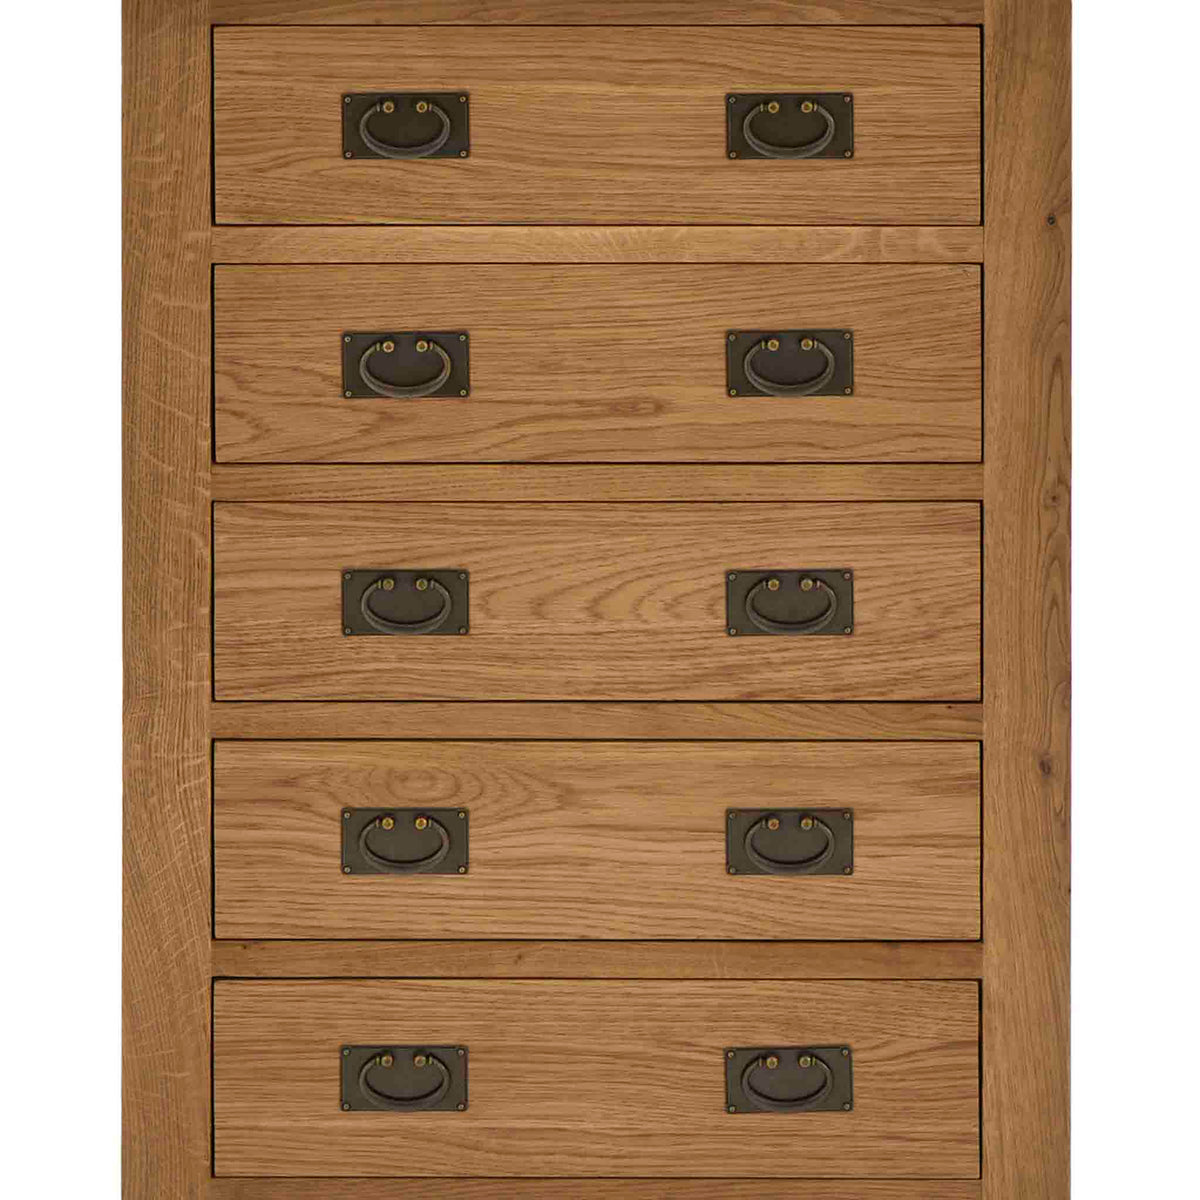 Zelah Oak 5 Drawer Chest of Drawers - Close up of drawer fronts